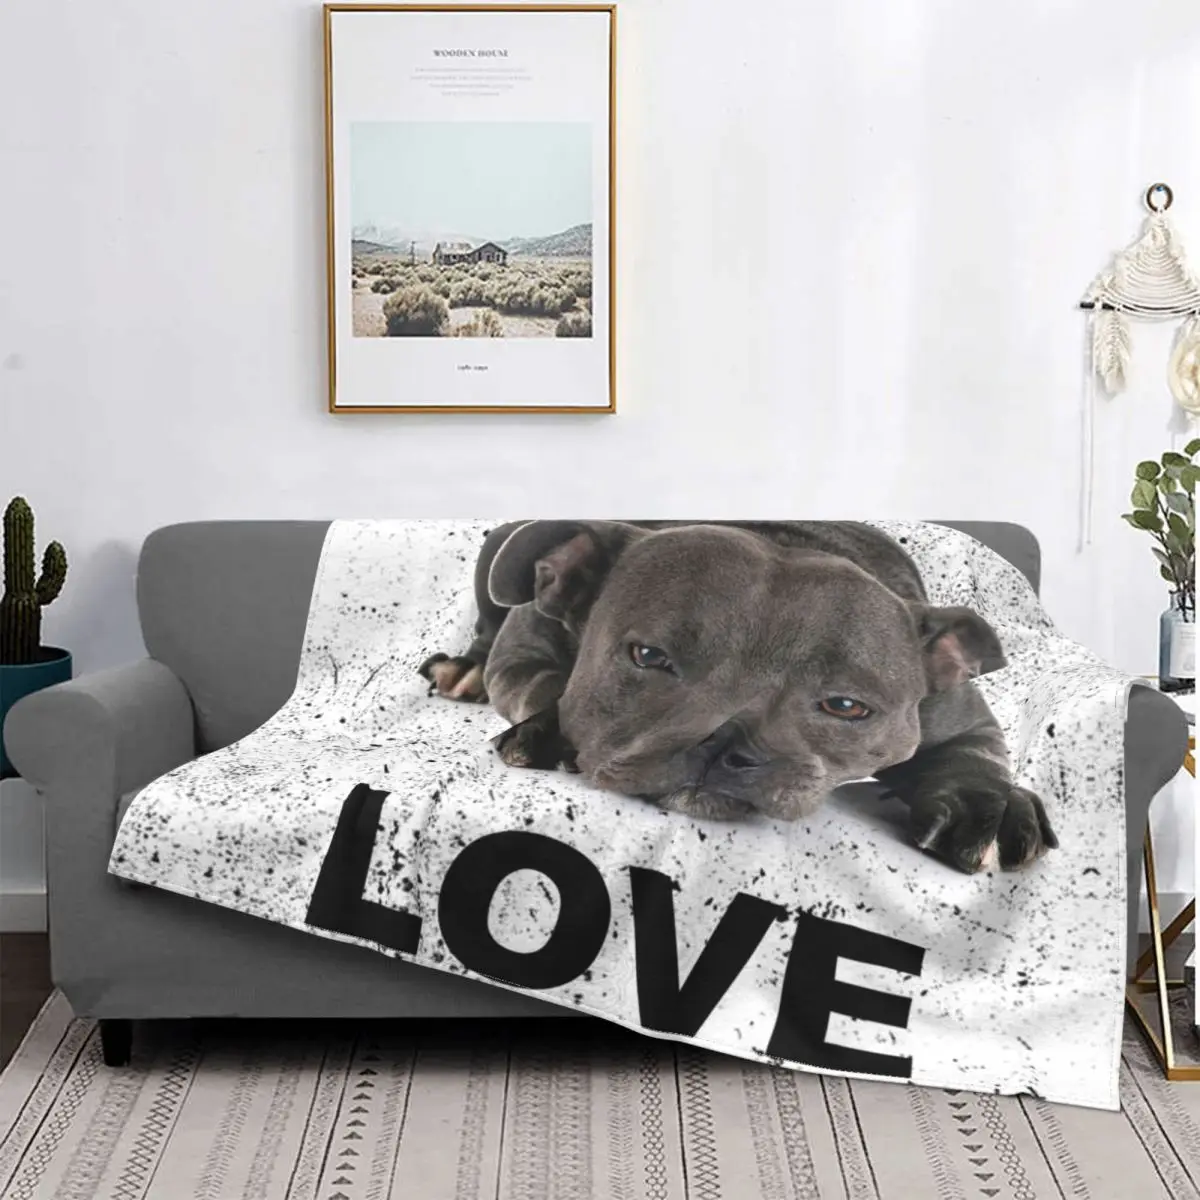 

Staffordshire Bull Terrier Dog Blankets Breathable Soft Flannel Autumn EBT Cute Love Throw Blanket for Couch Outdoor Bedroom